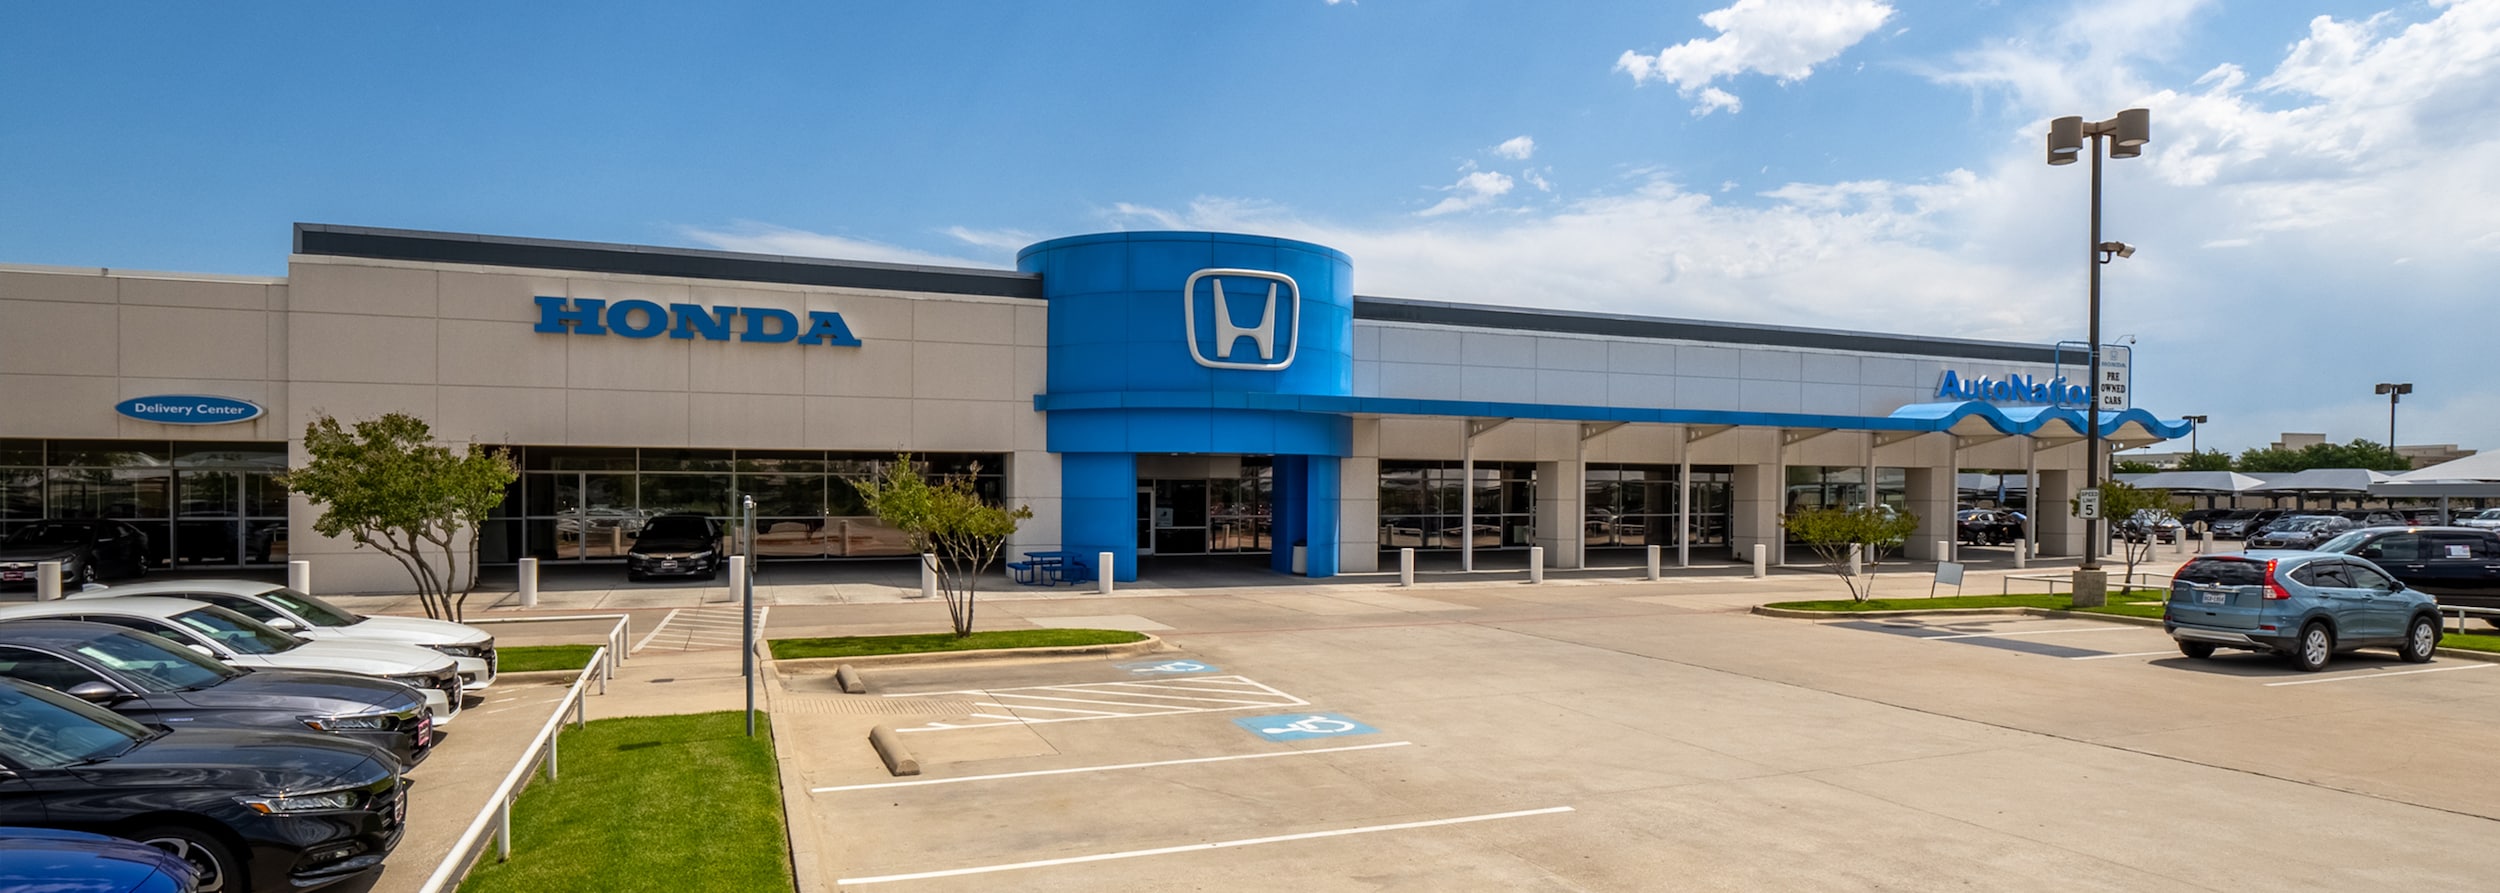 AutoNation Honda Lewisville offers sales, service, and parts in Lewisville